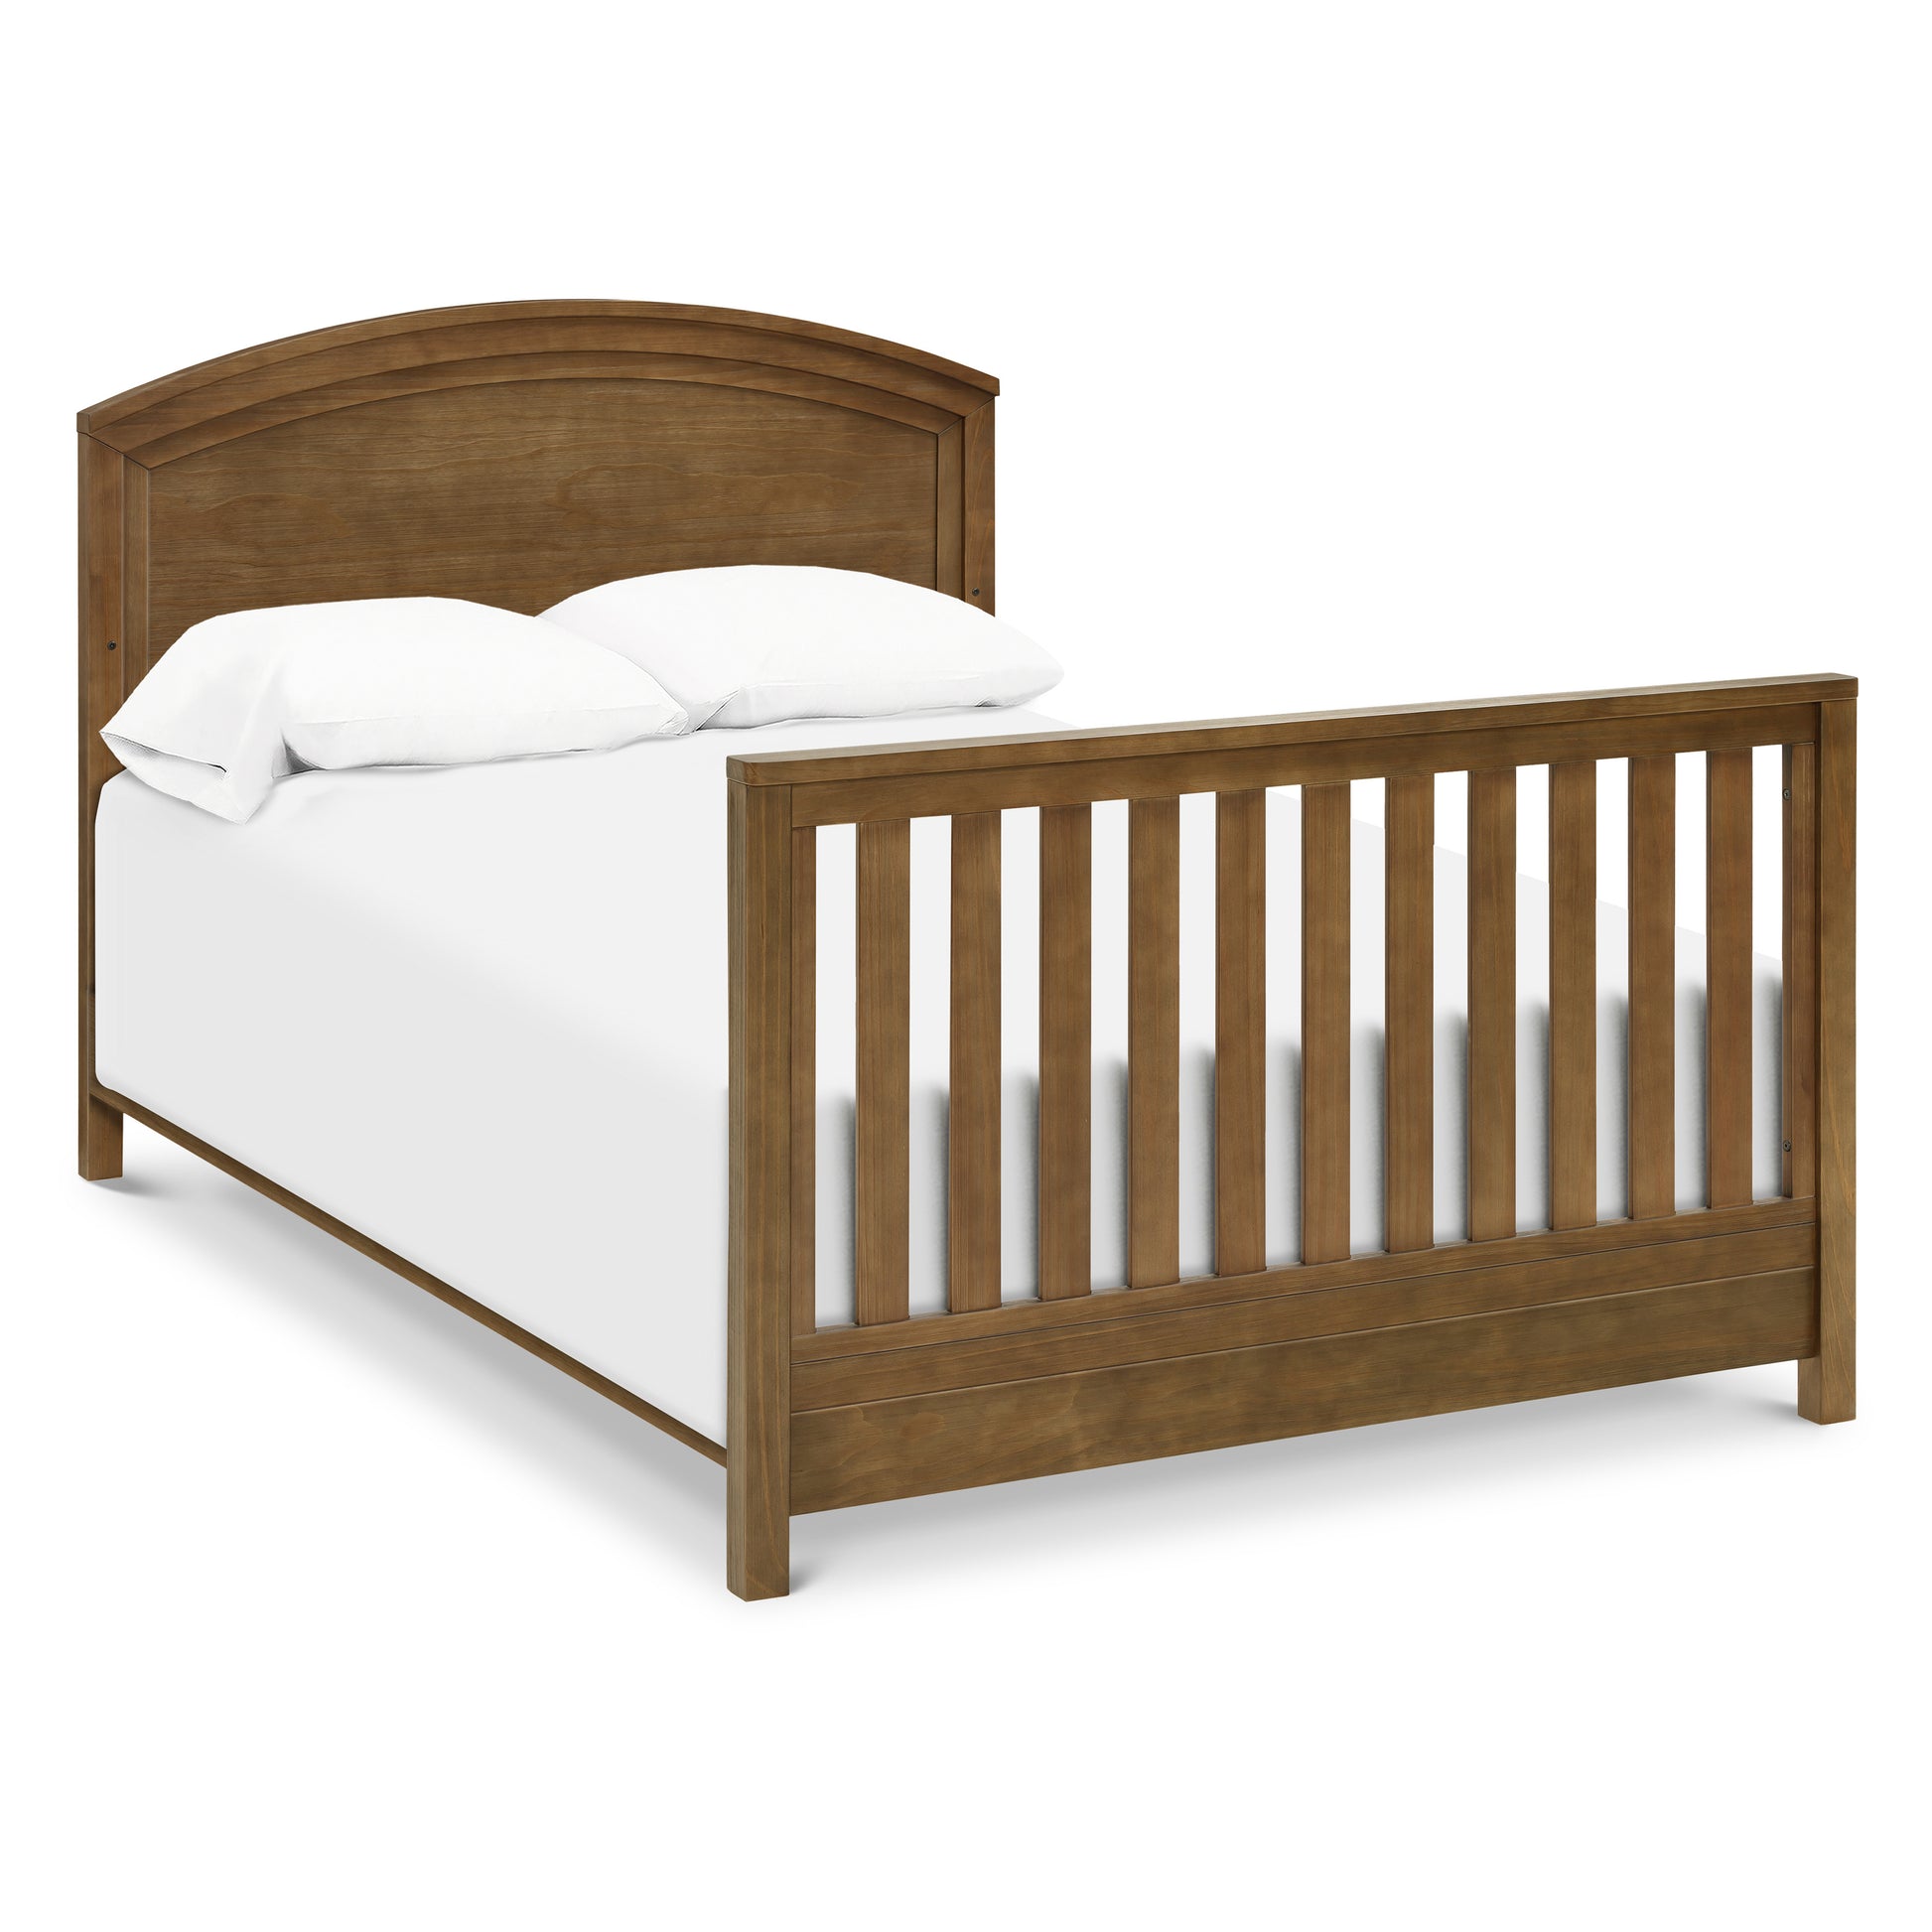 B26401LDF,Hemsted 4-in-1 Convertible Crib in Walnut Driftwood